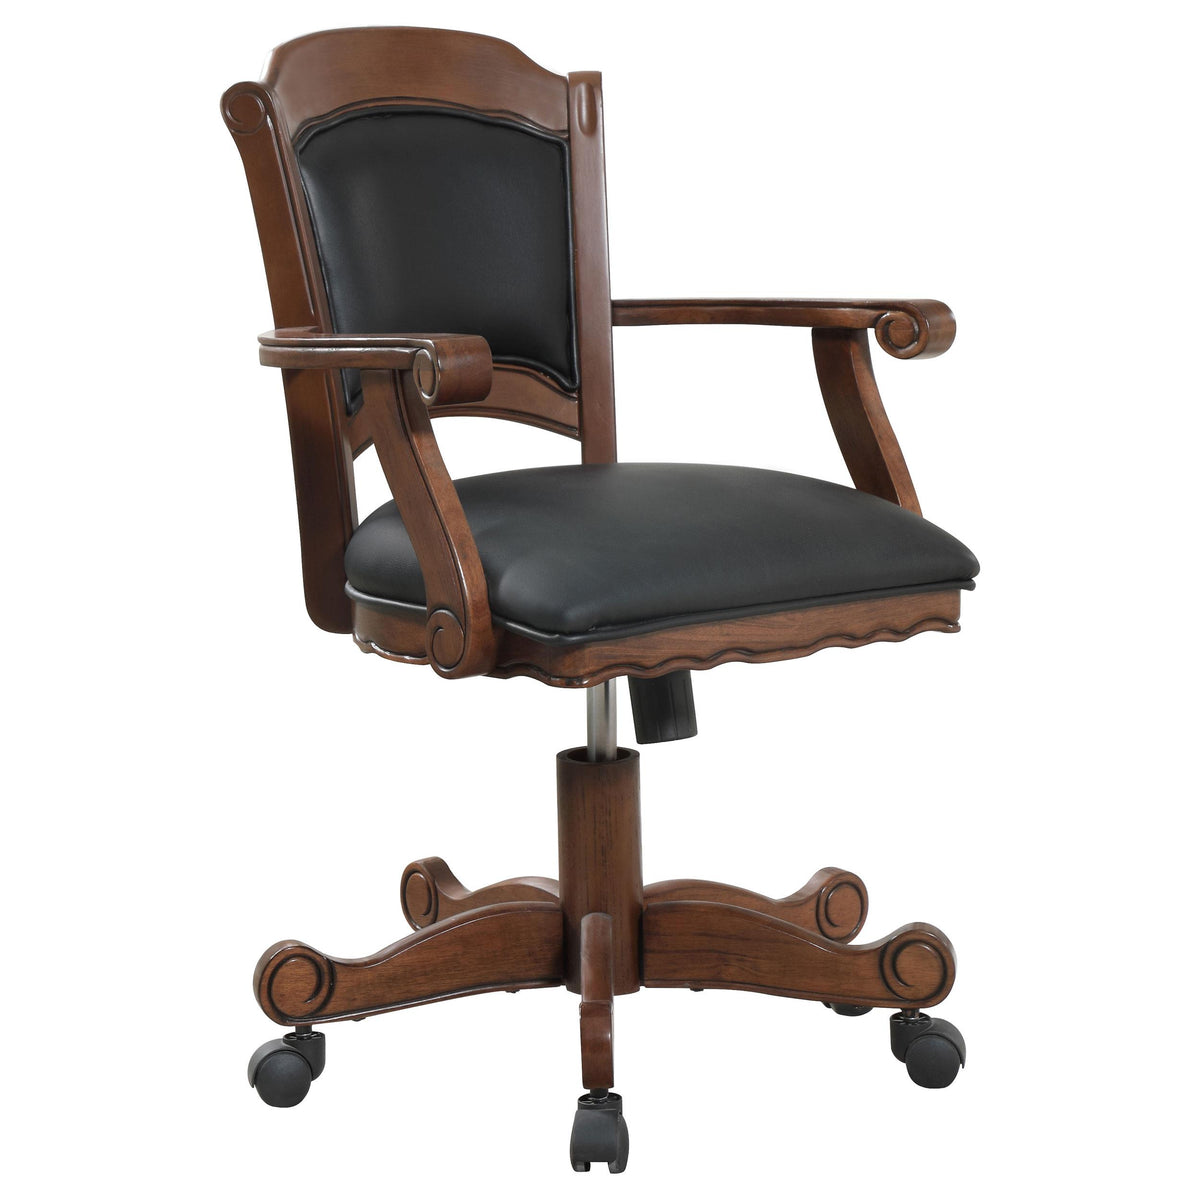 Turk Game Chair with Casters Black and Tobacco Turk Game Chair with Casters Black and Tobacco Half Price Furniture